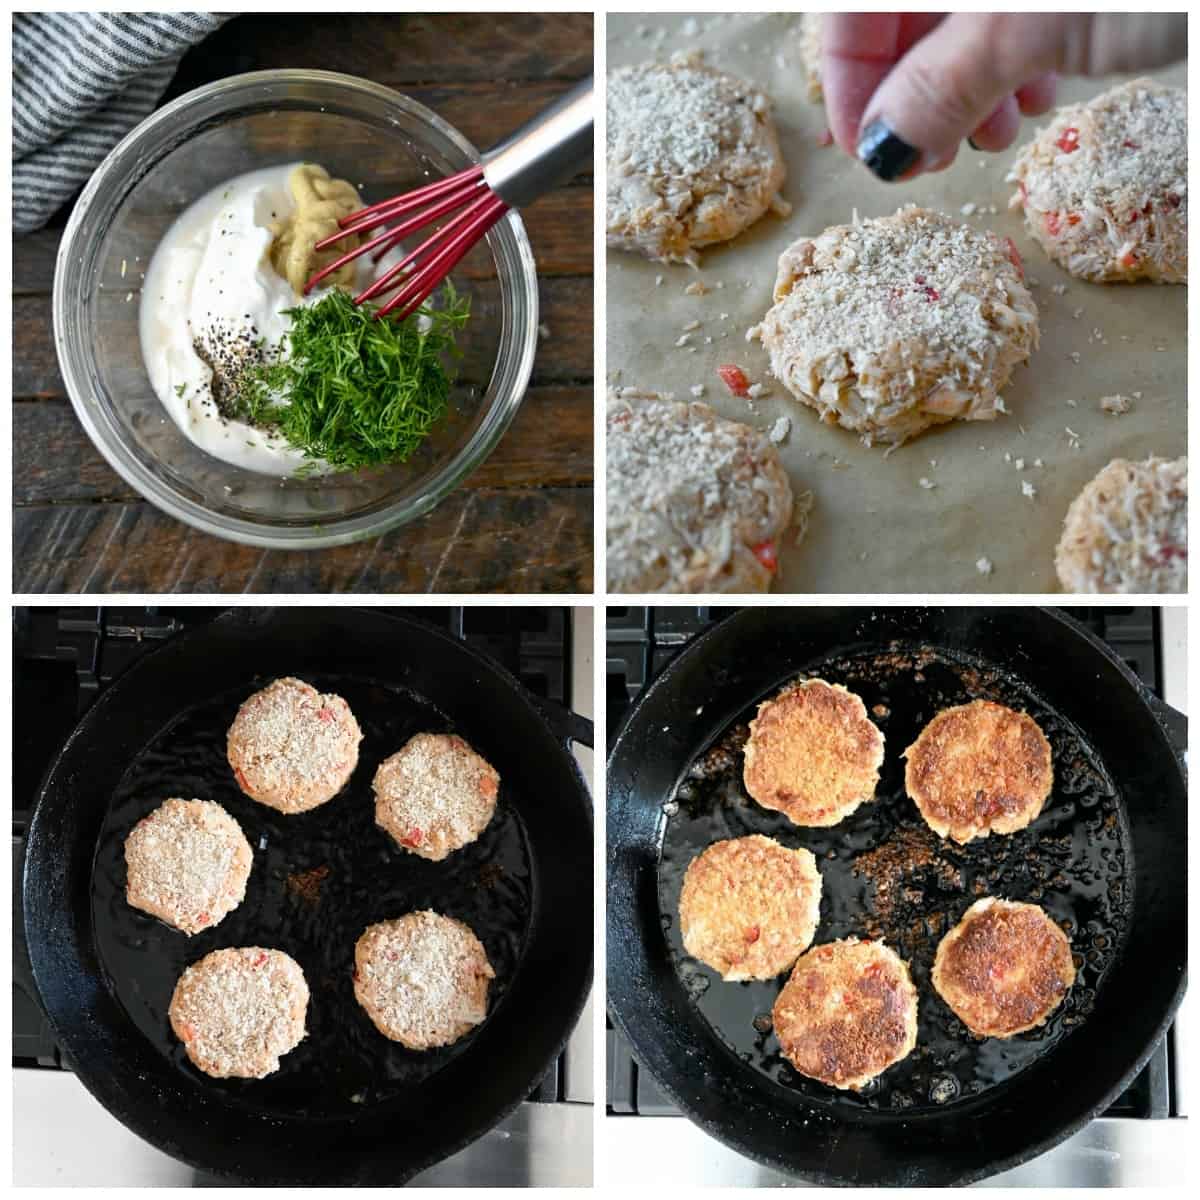 Four process photos. First one, all ingredients in a small bowl to whisk together for the lemon dill sauce. Second one, crab patties on a baking sheet and more bread crumbs being sprinkled on top. Third one, crab patties in a cast iron skillet. Fourth one, crab patties flipped and cooked on the other side in the cast iron skillet.